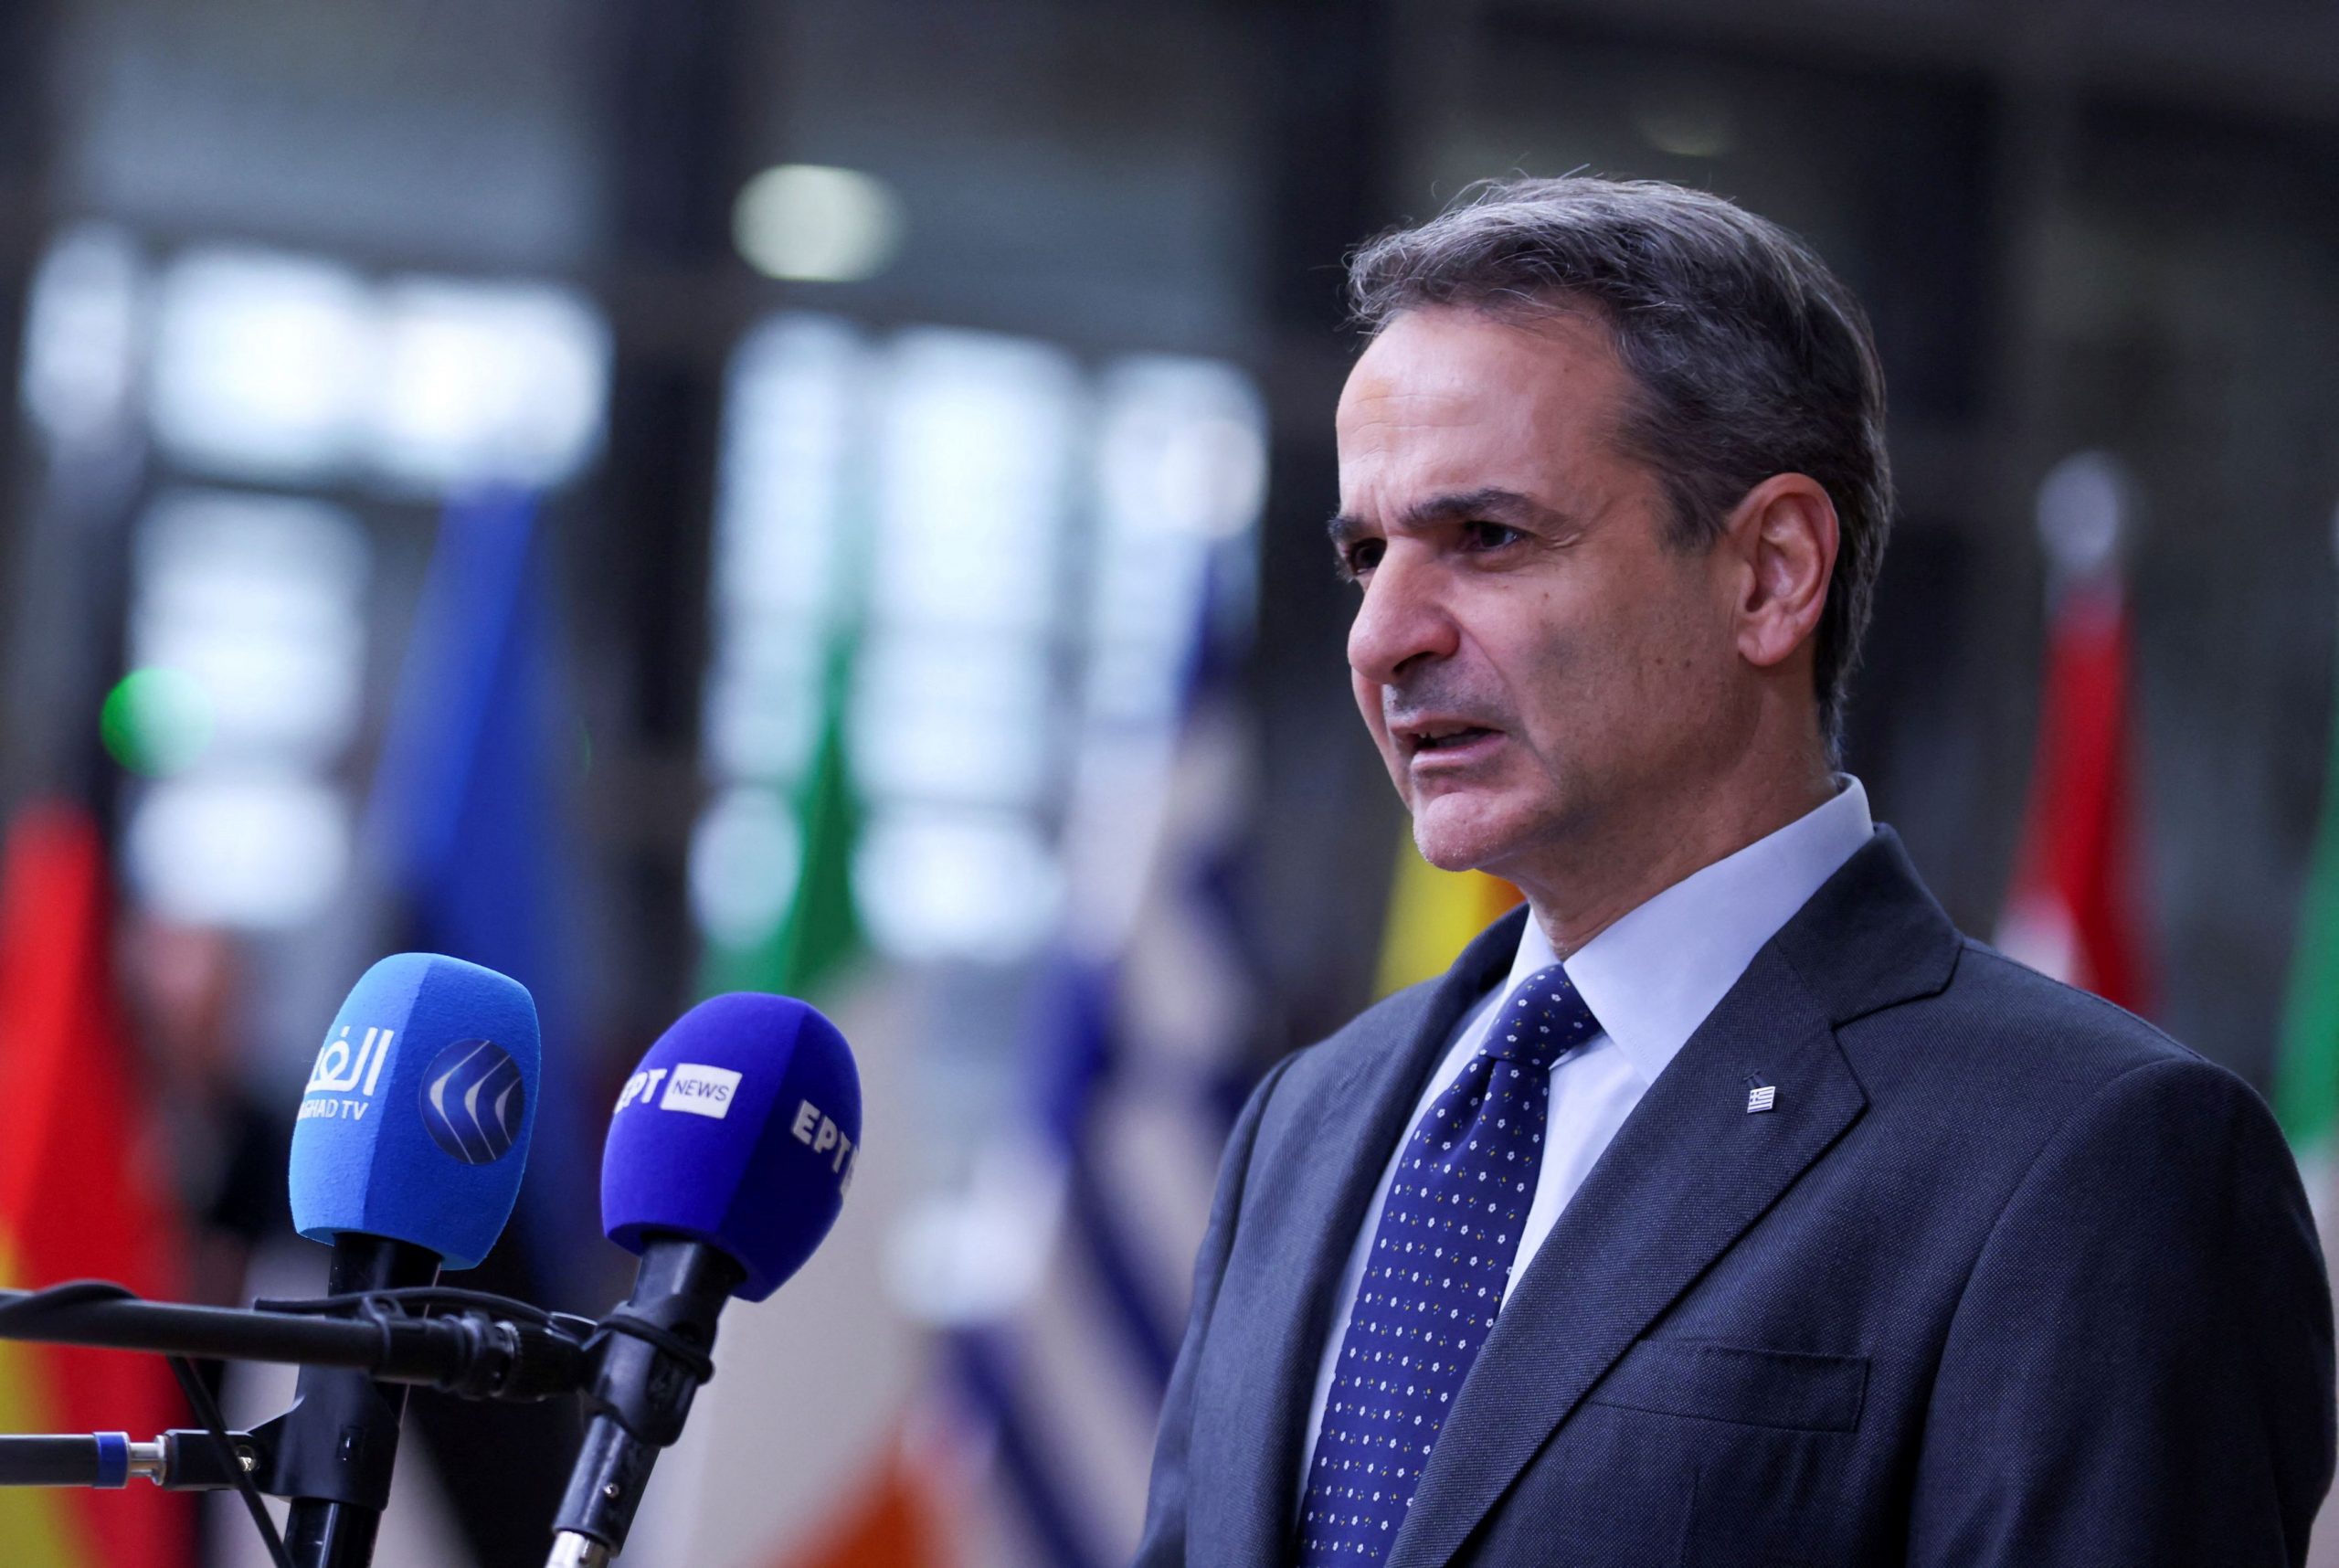 EU Summit: PM Mitsotakis Says Funds for Migration Crucial